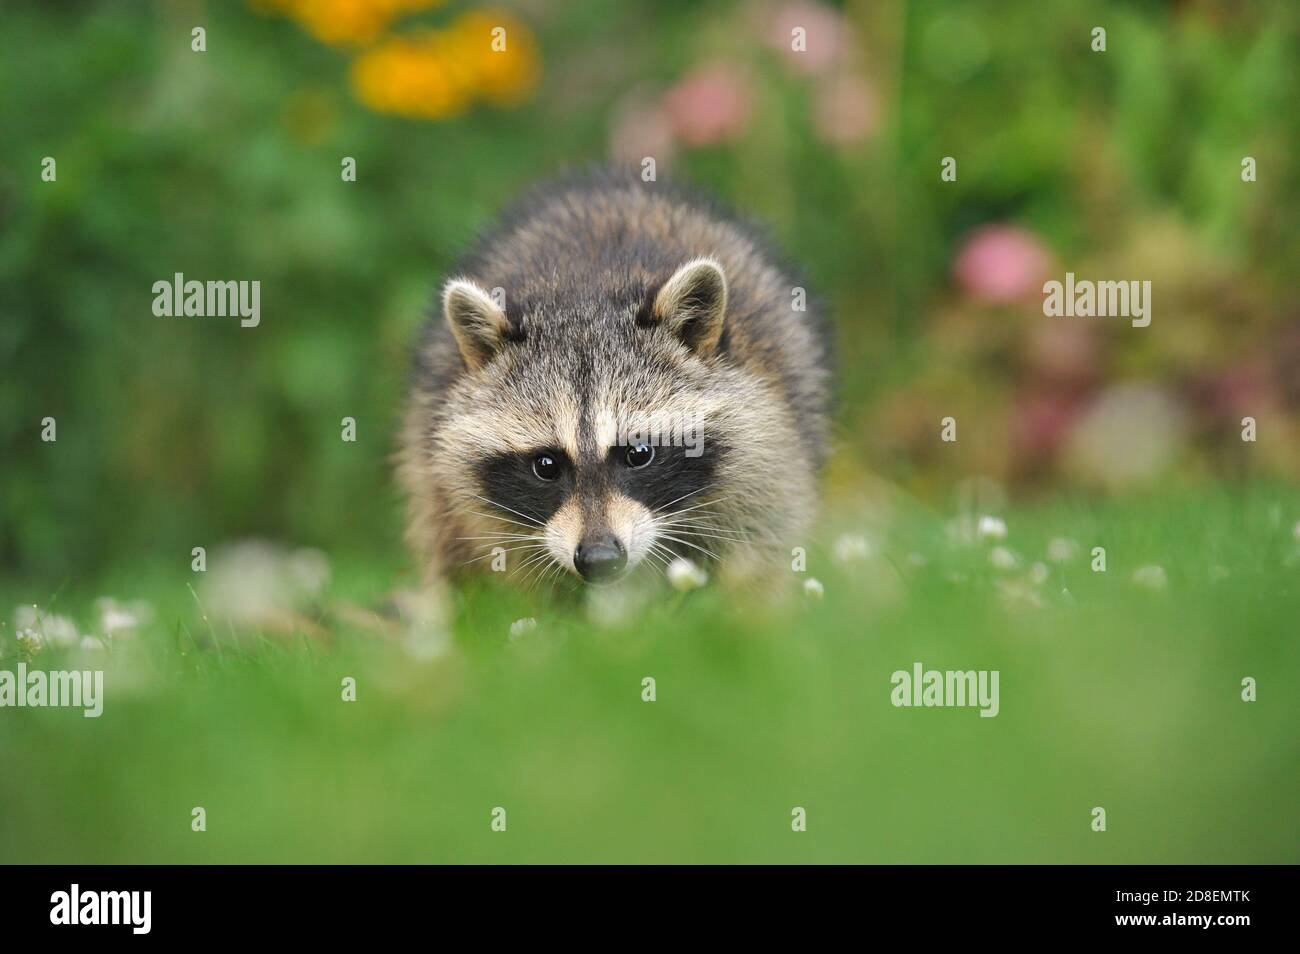 A baby raccoon in the grass Stock Photo